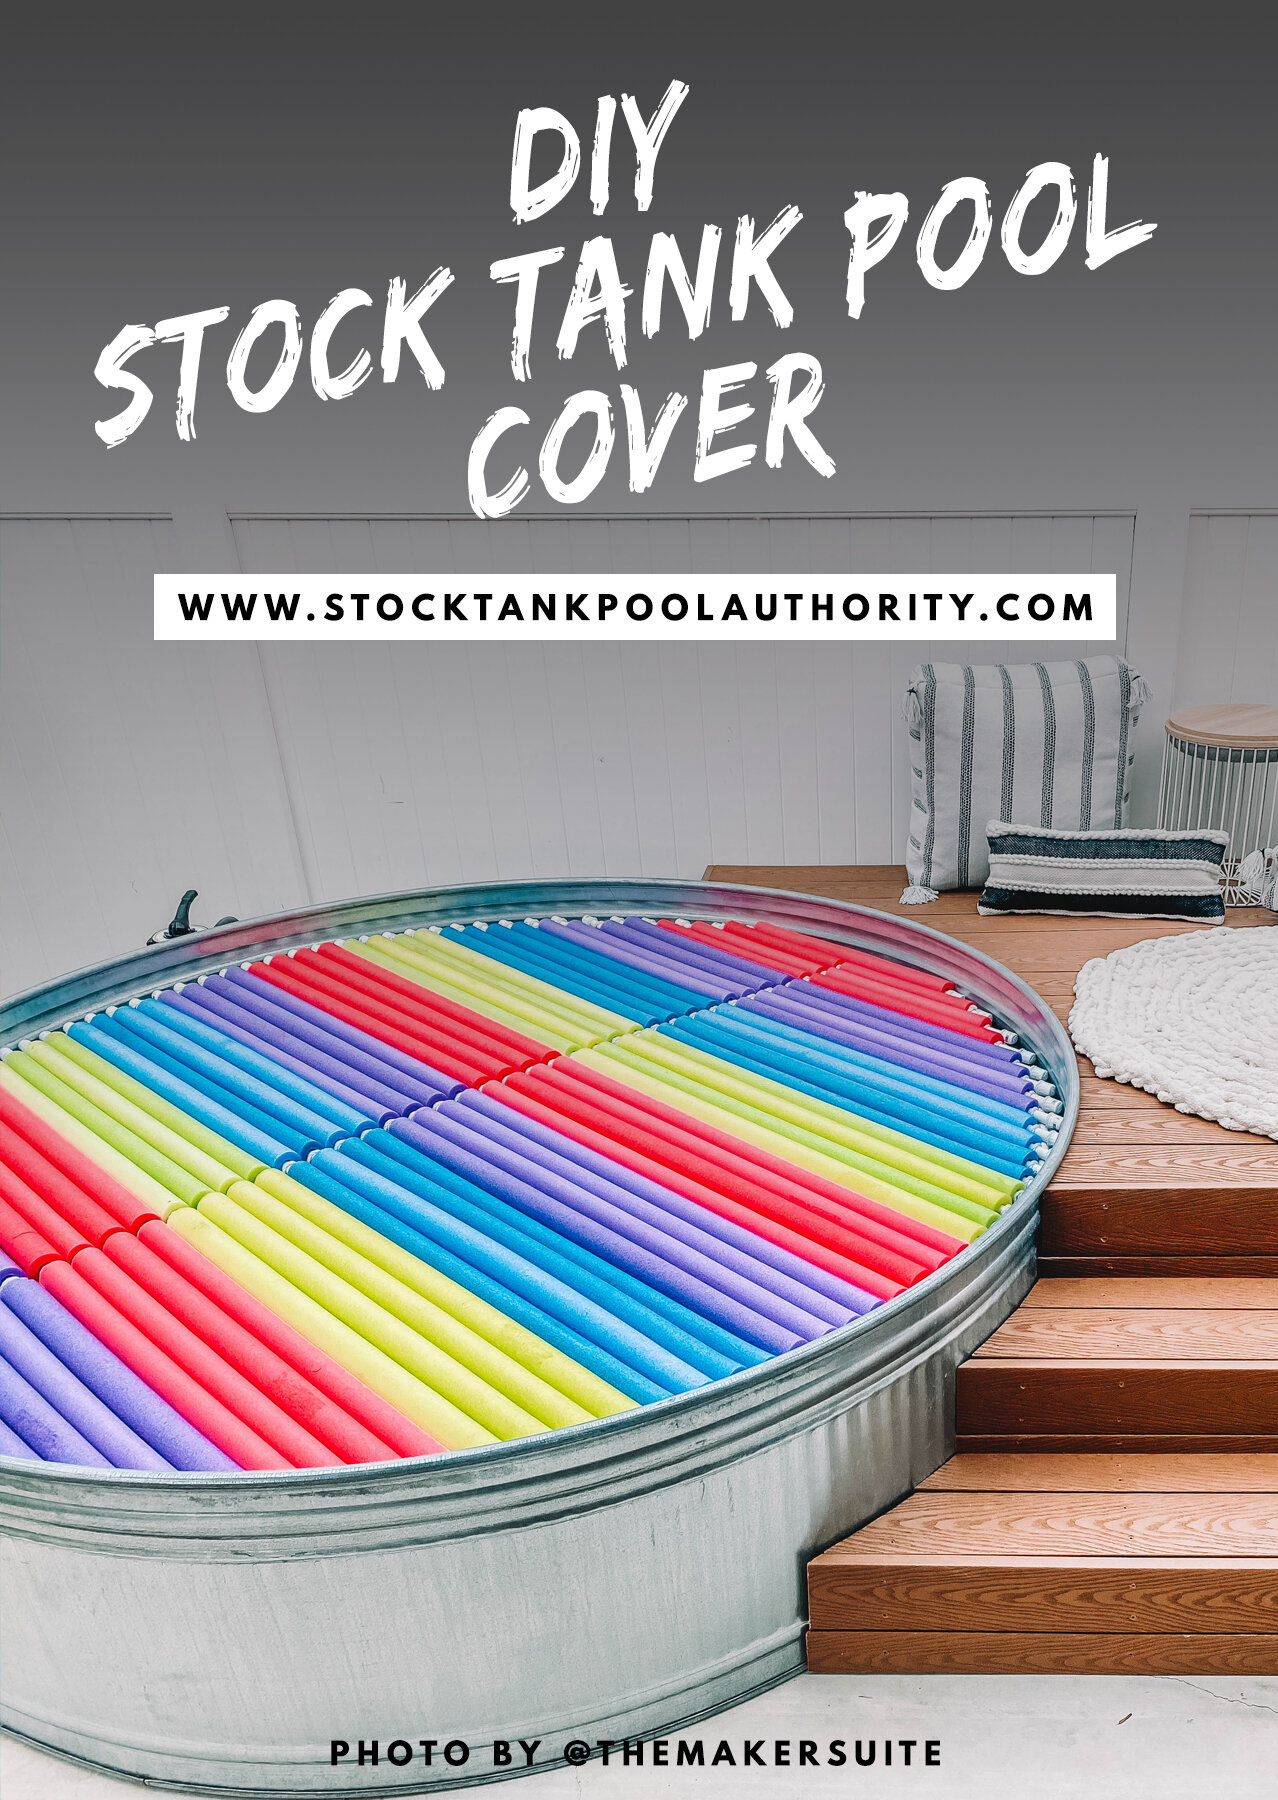 Stock Tank Pool Authority Noodle Cover DIY 2.jpg